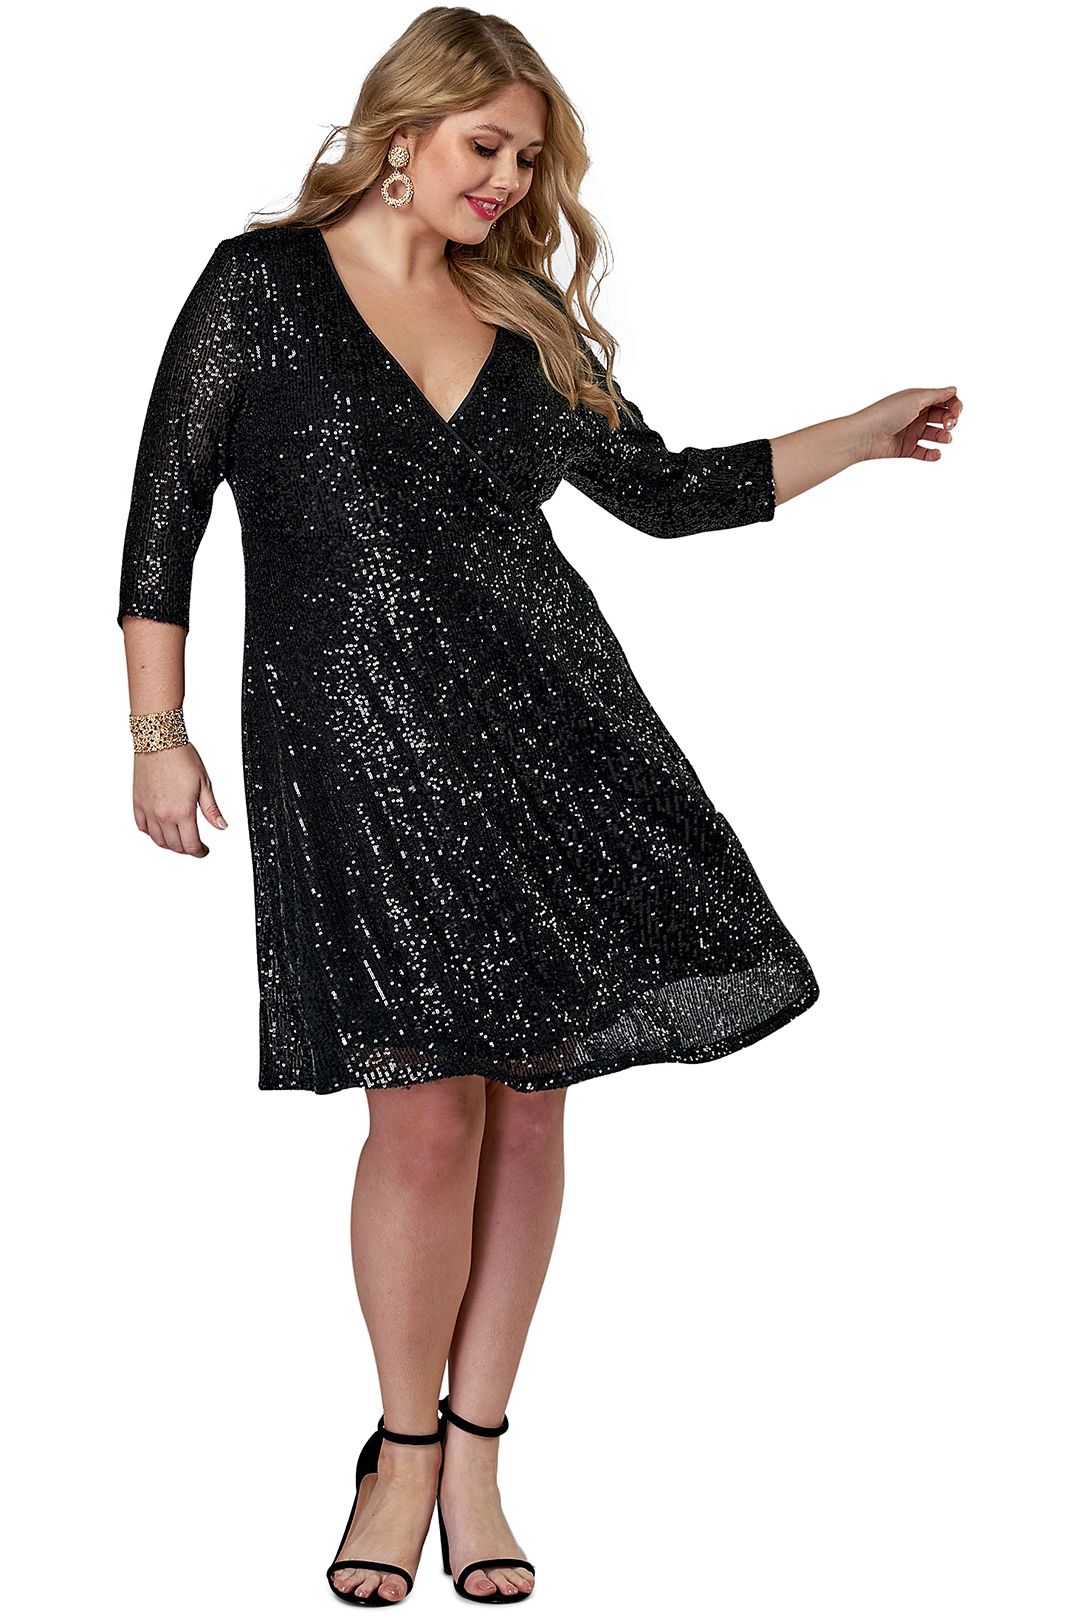 Pink Dusk Are you Jelly Sequin Dress Black